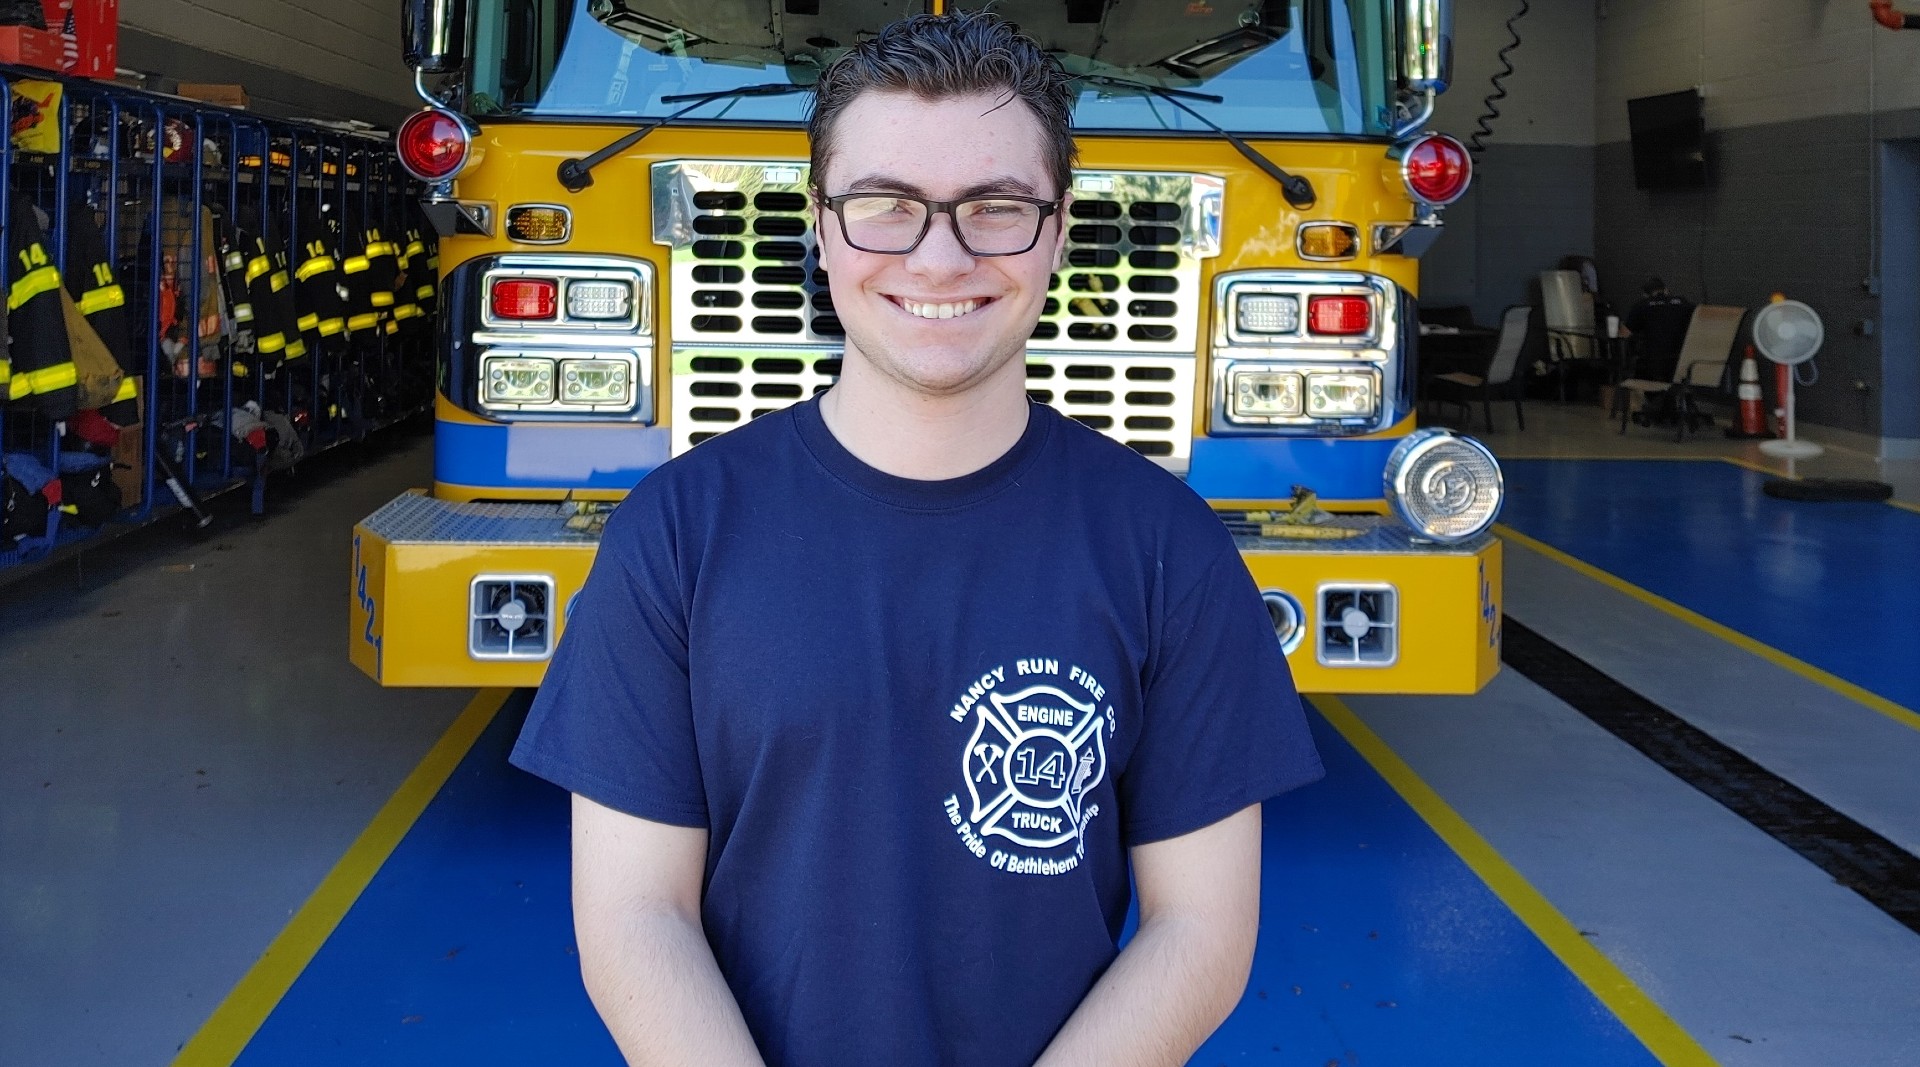 PA Virtual student stands in front of a firetruck at the station he volunteers at